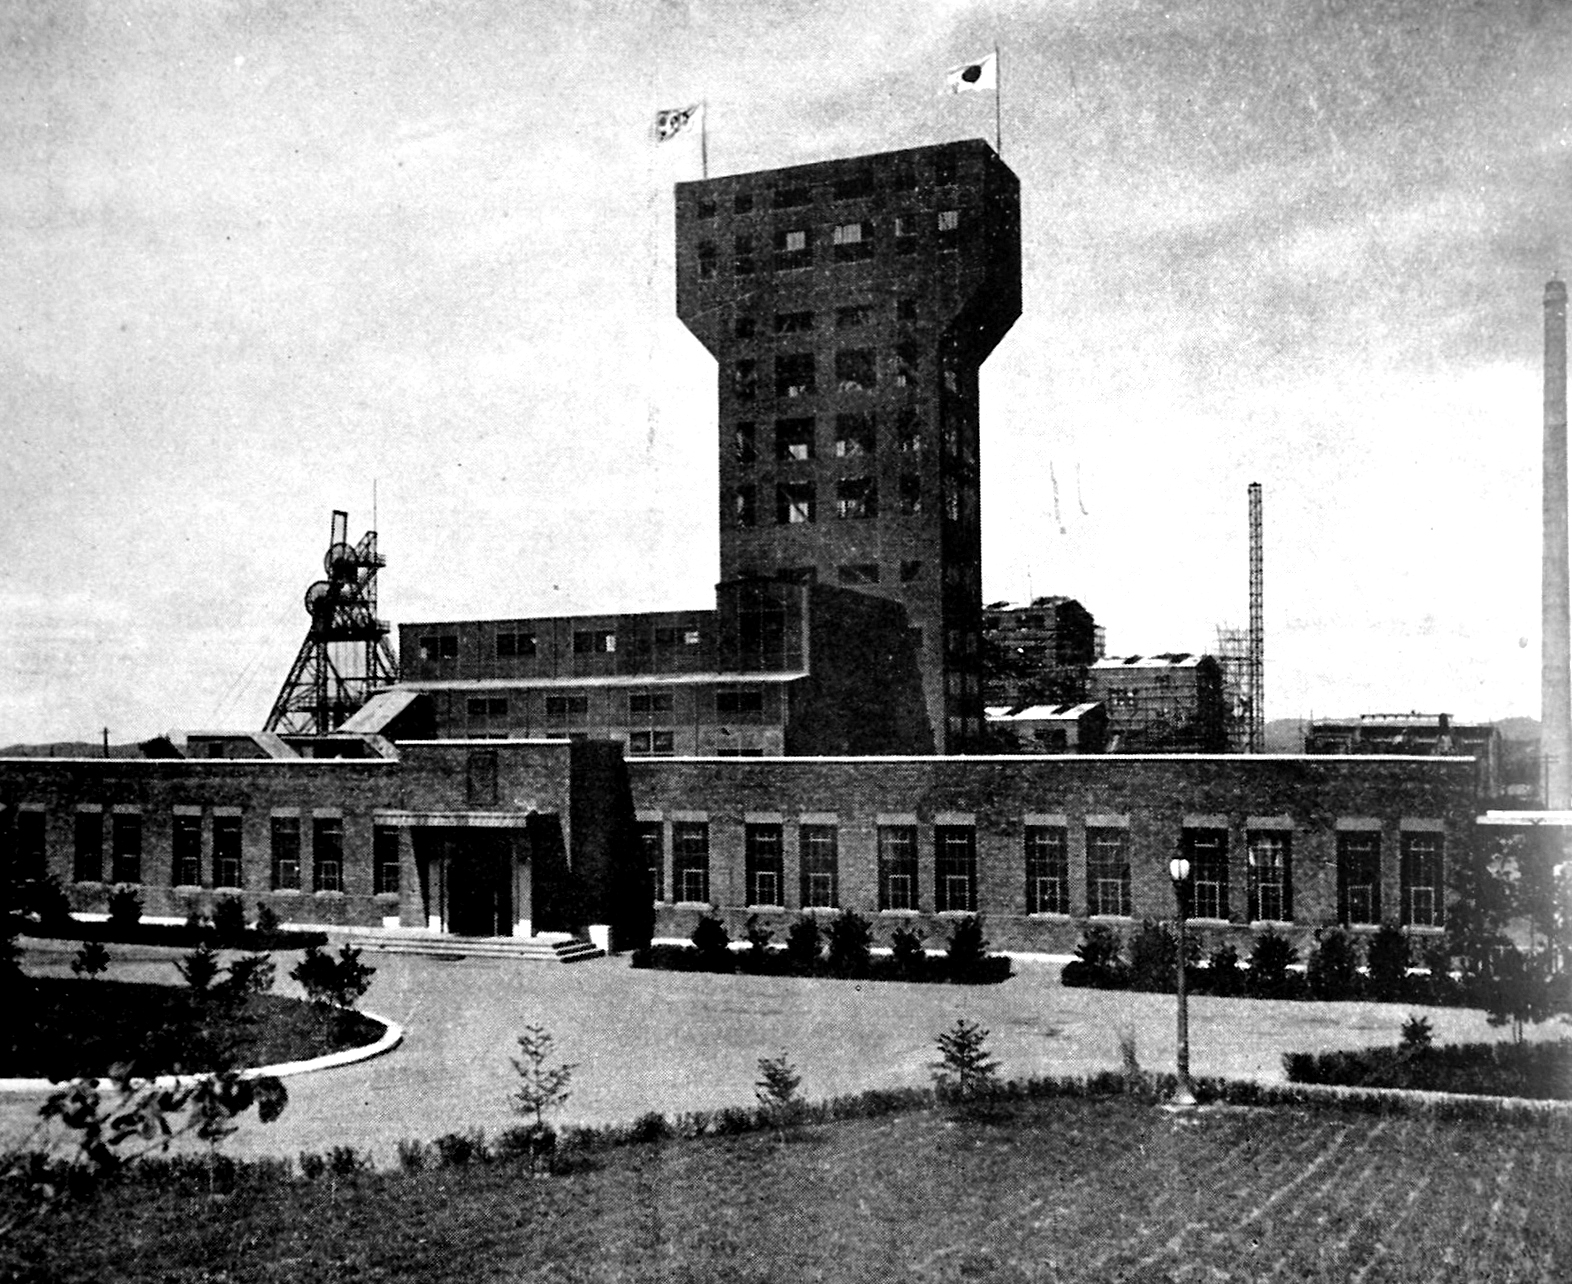 The winding tower at the Fushun colliery’s Longfeng shaft mine in the 1930s.